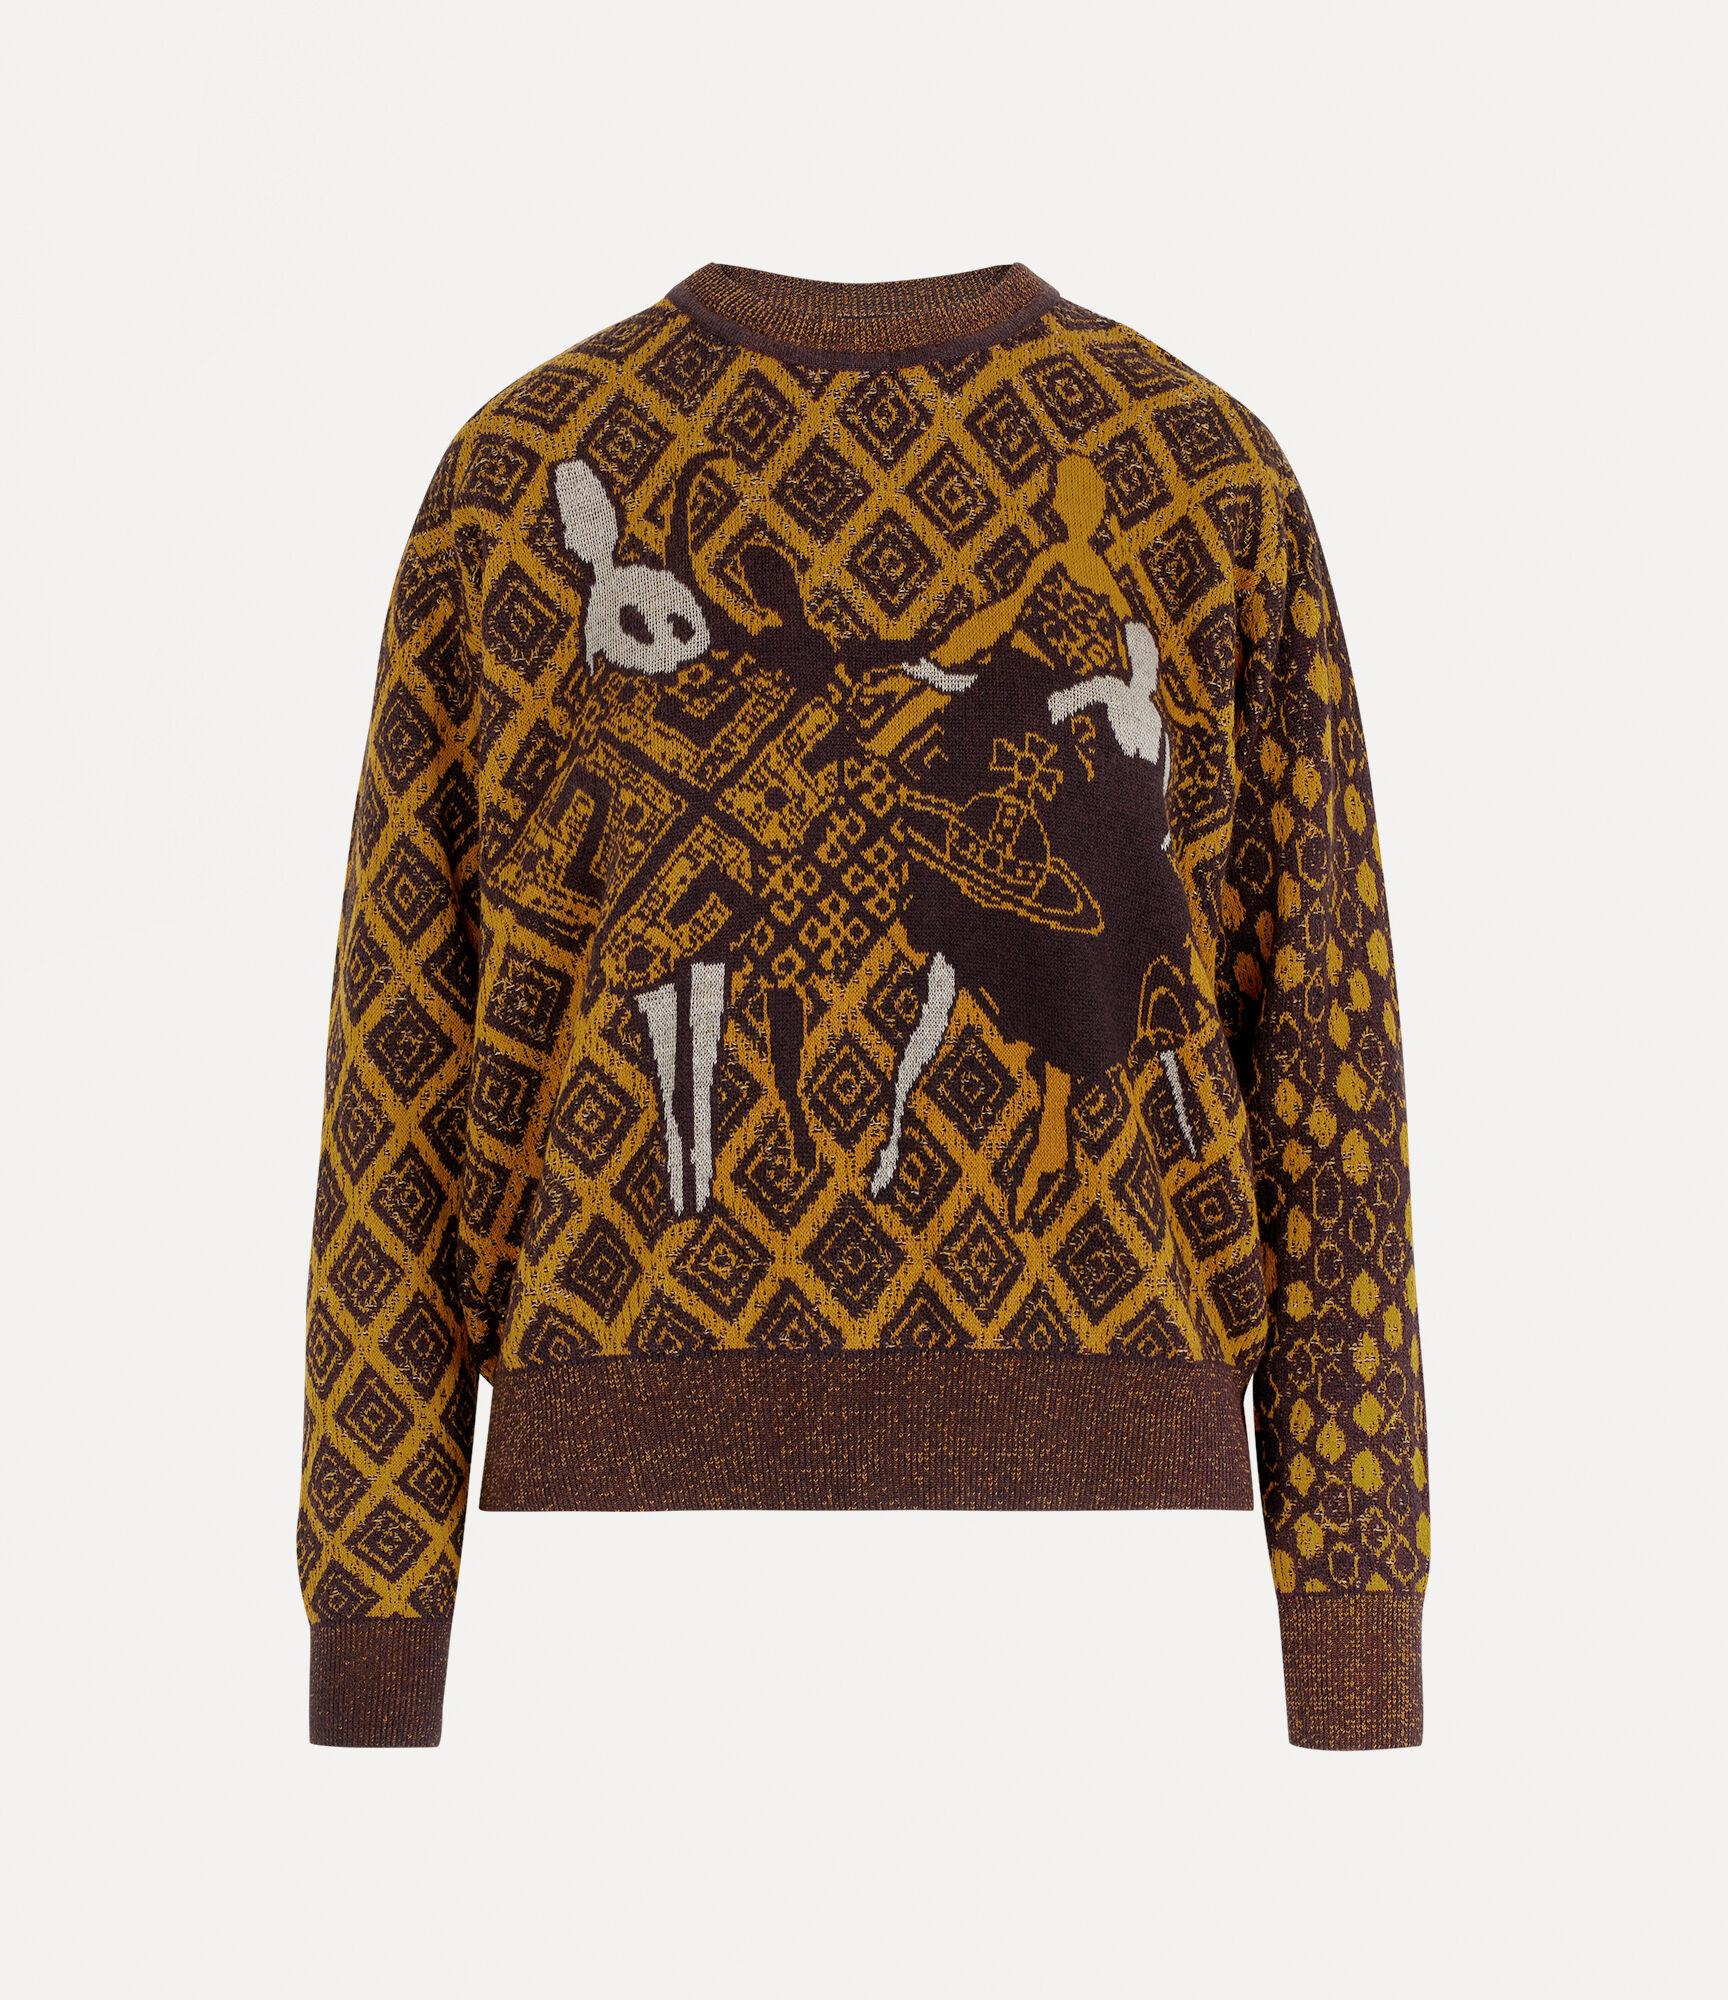 Vivienne Westwood Final Patched Jumper in Brown | Lyst UK